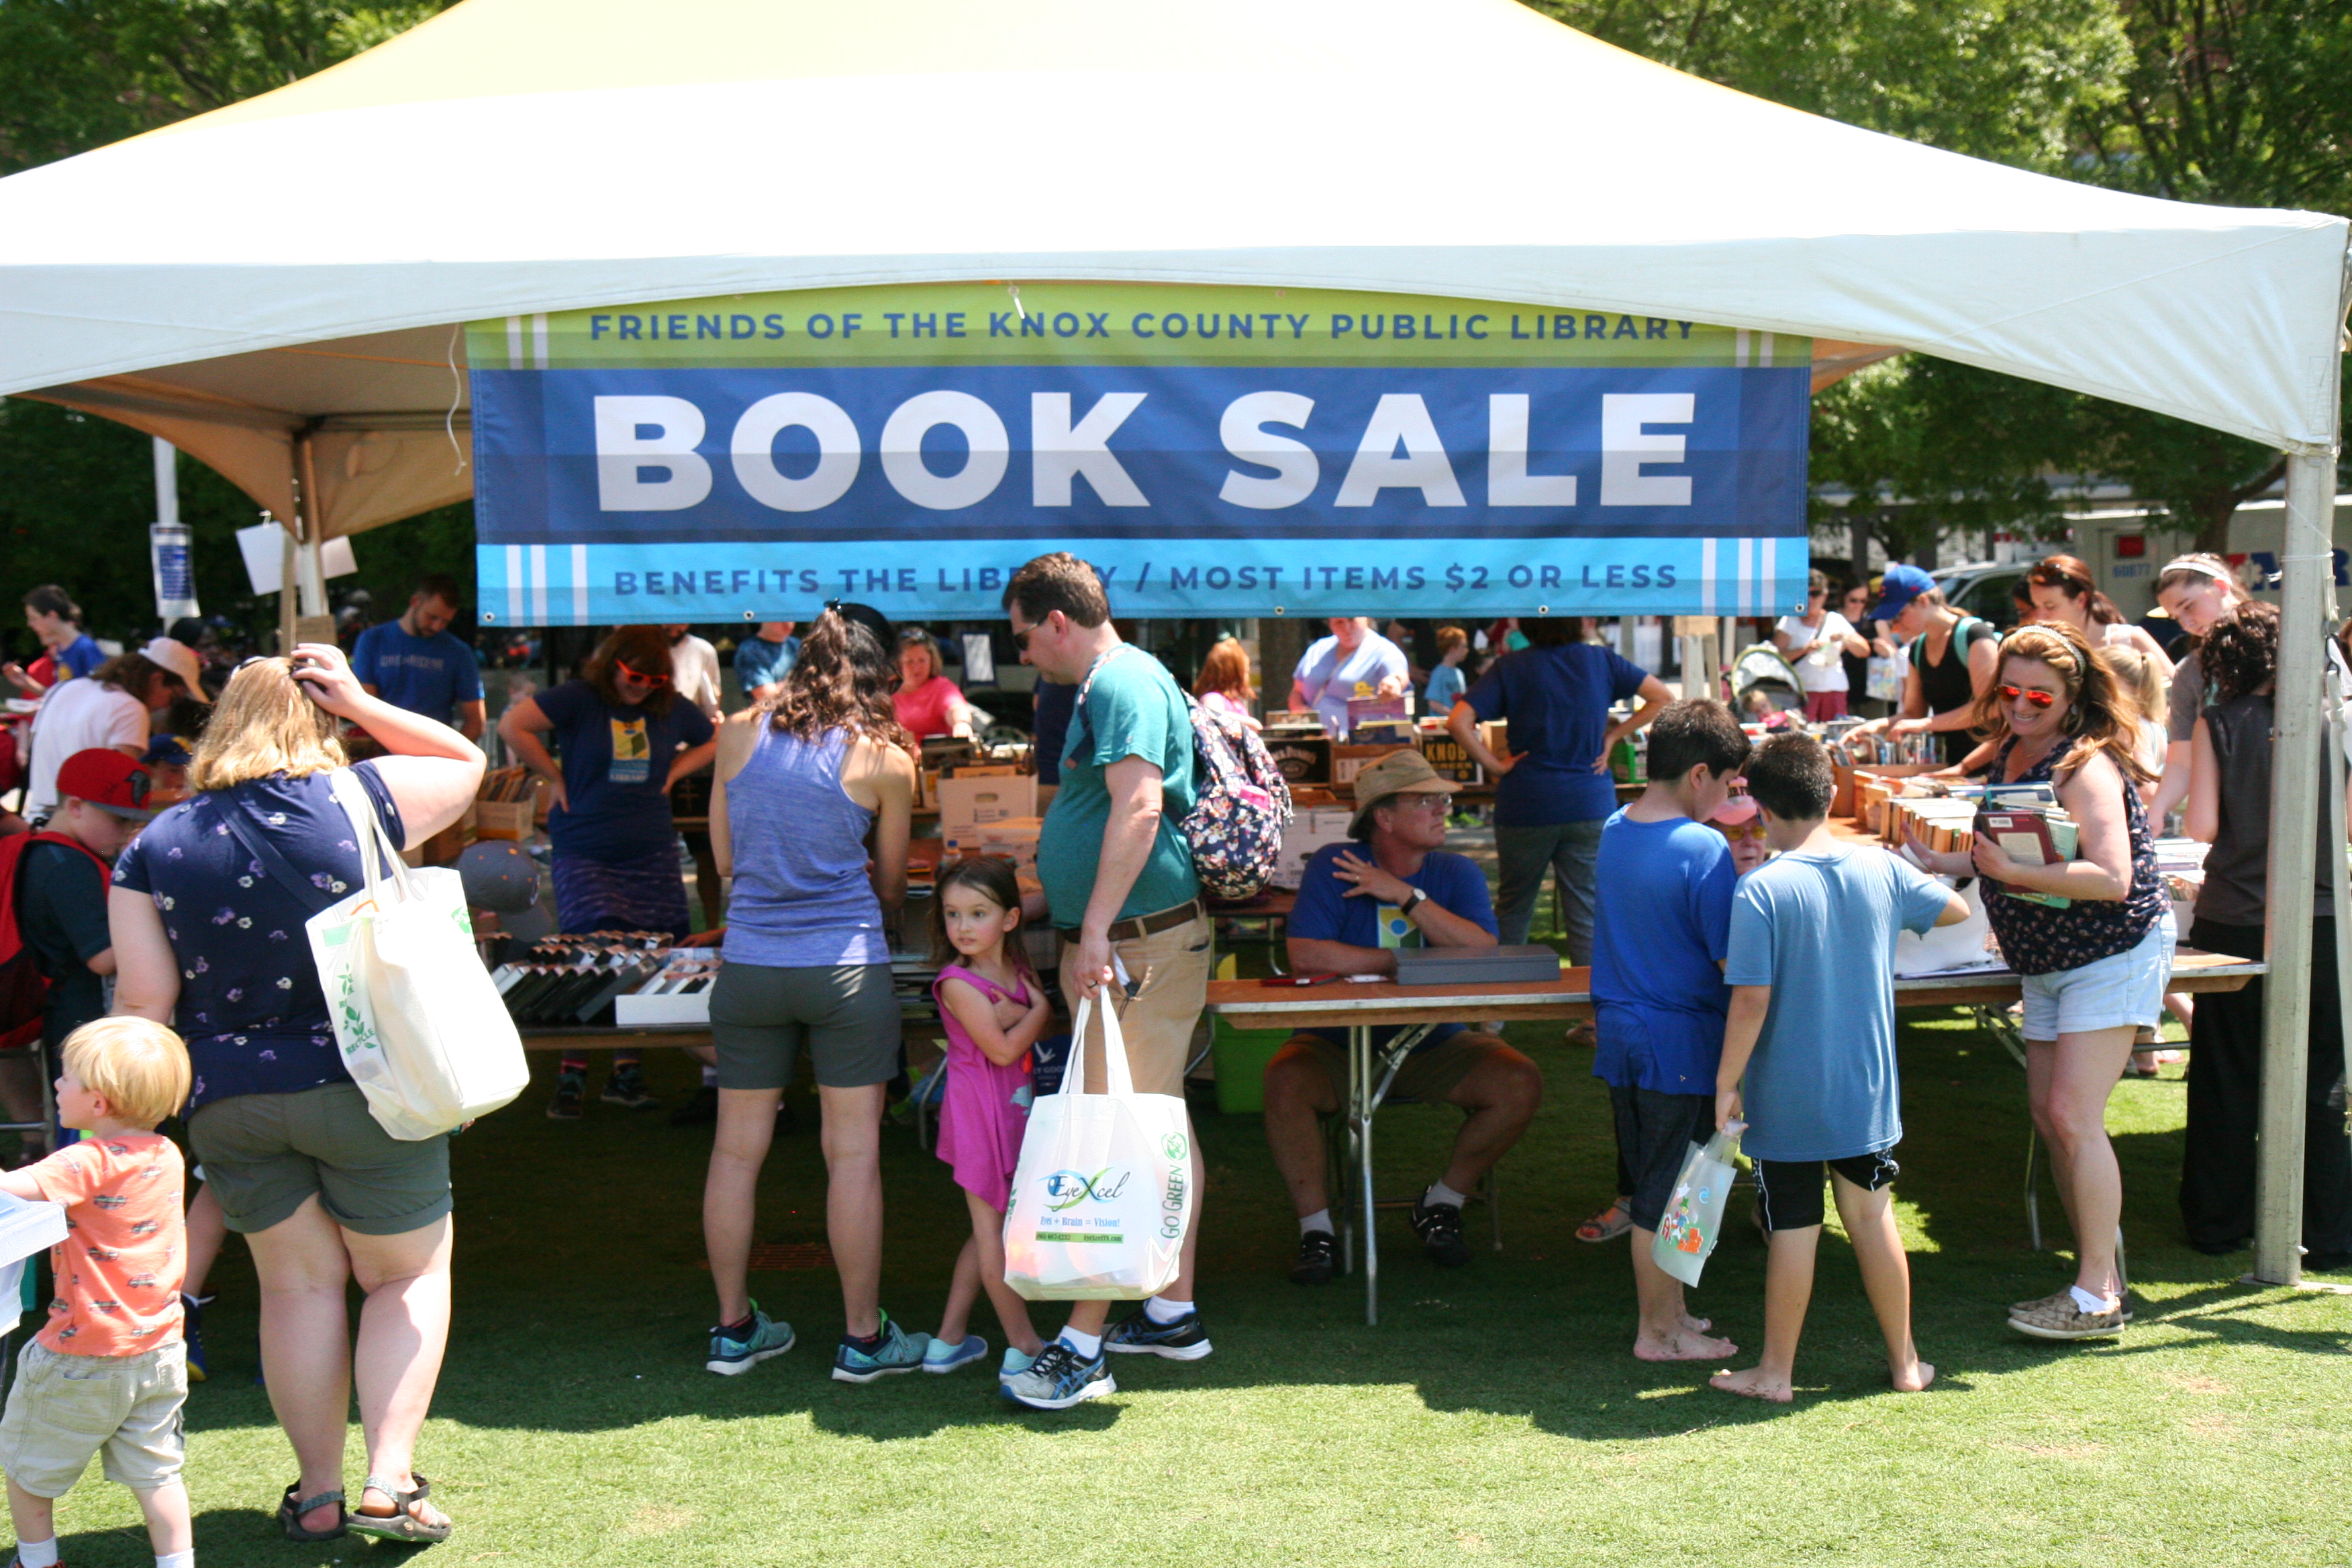 Book sale booth at the Children's Festival of Reading